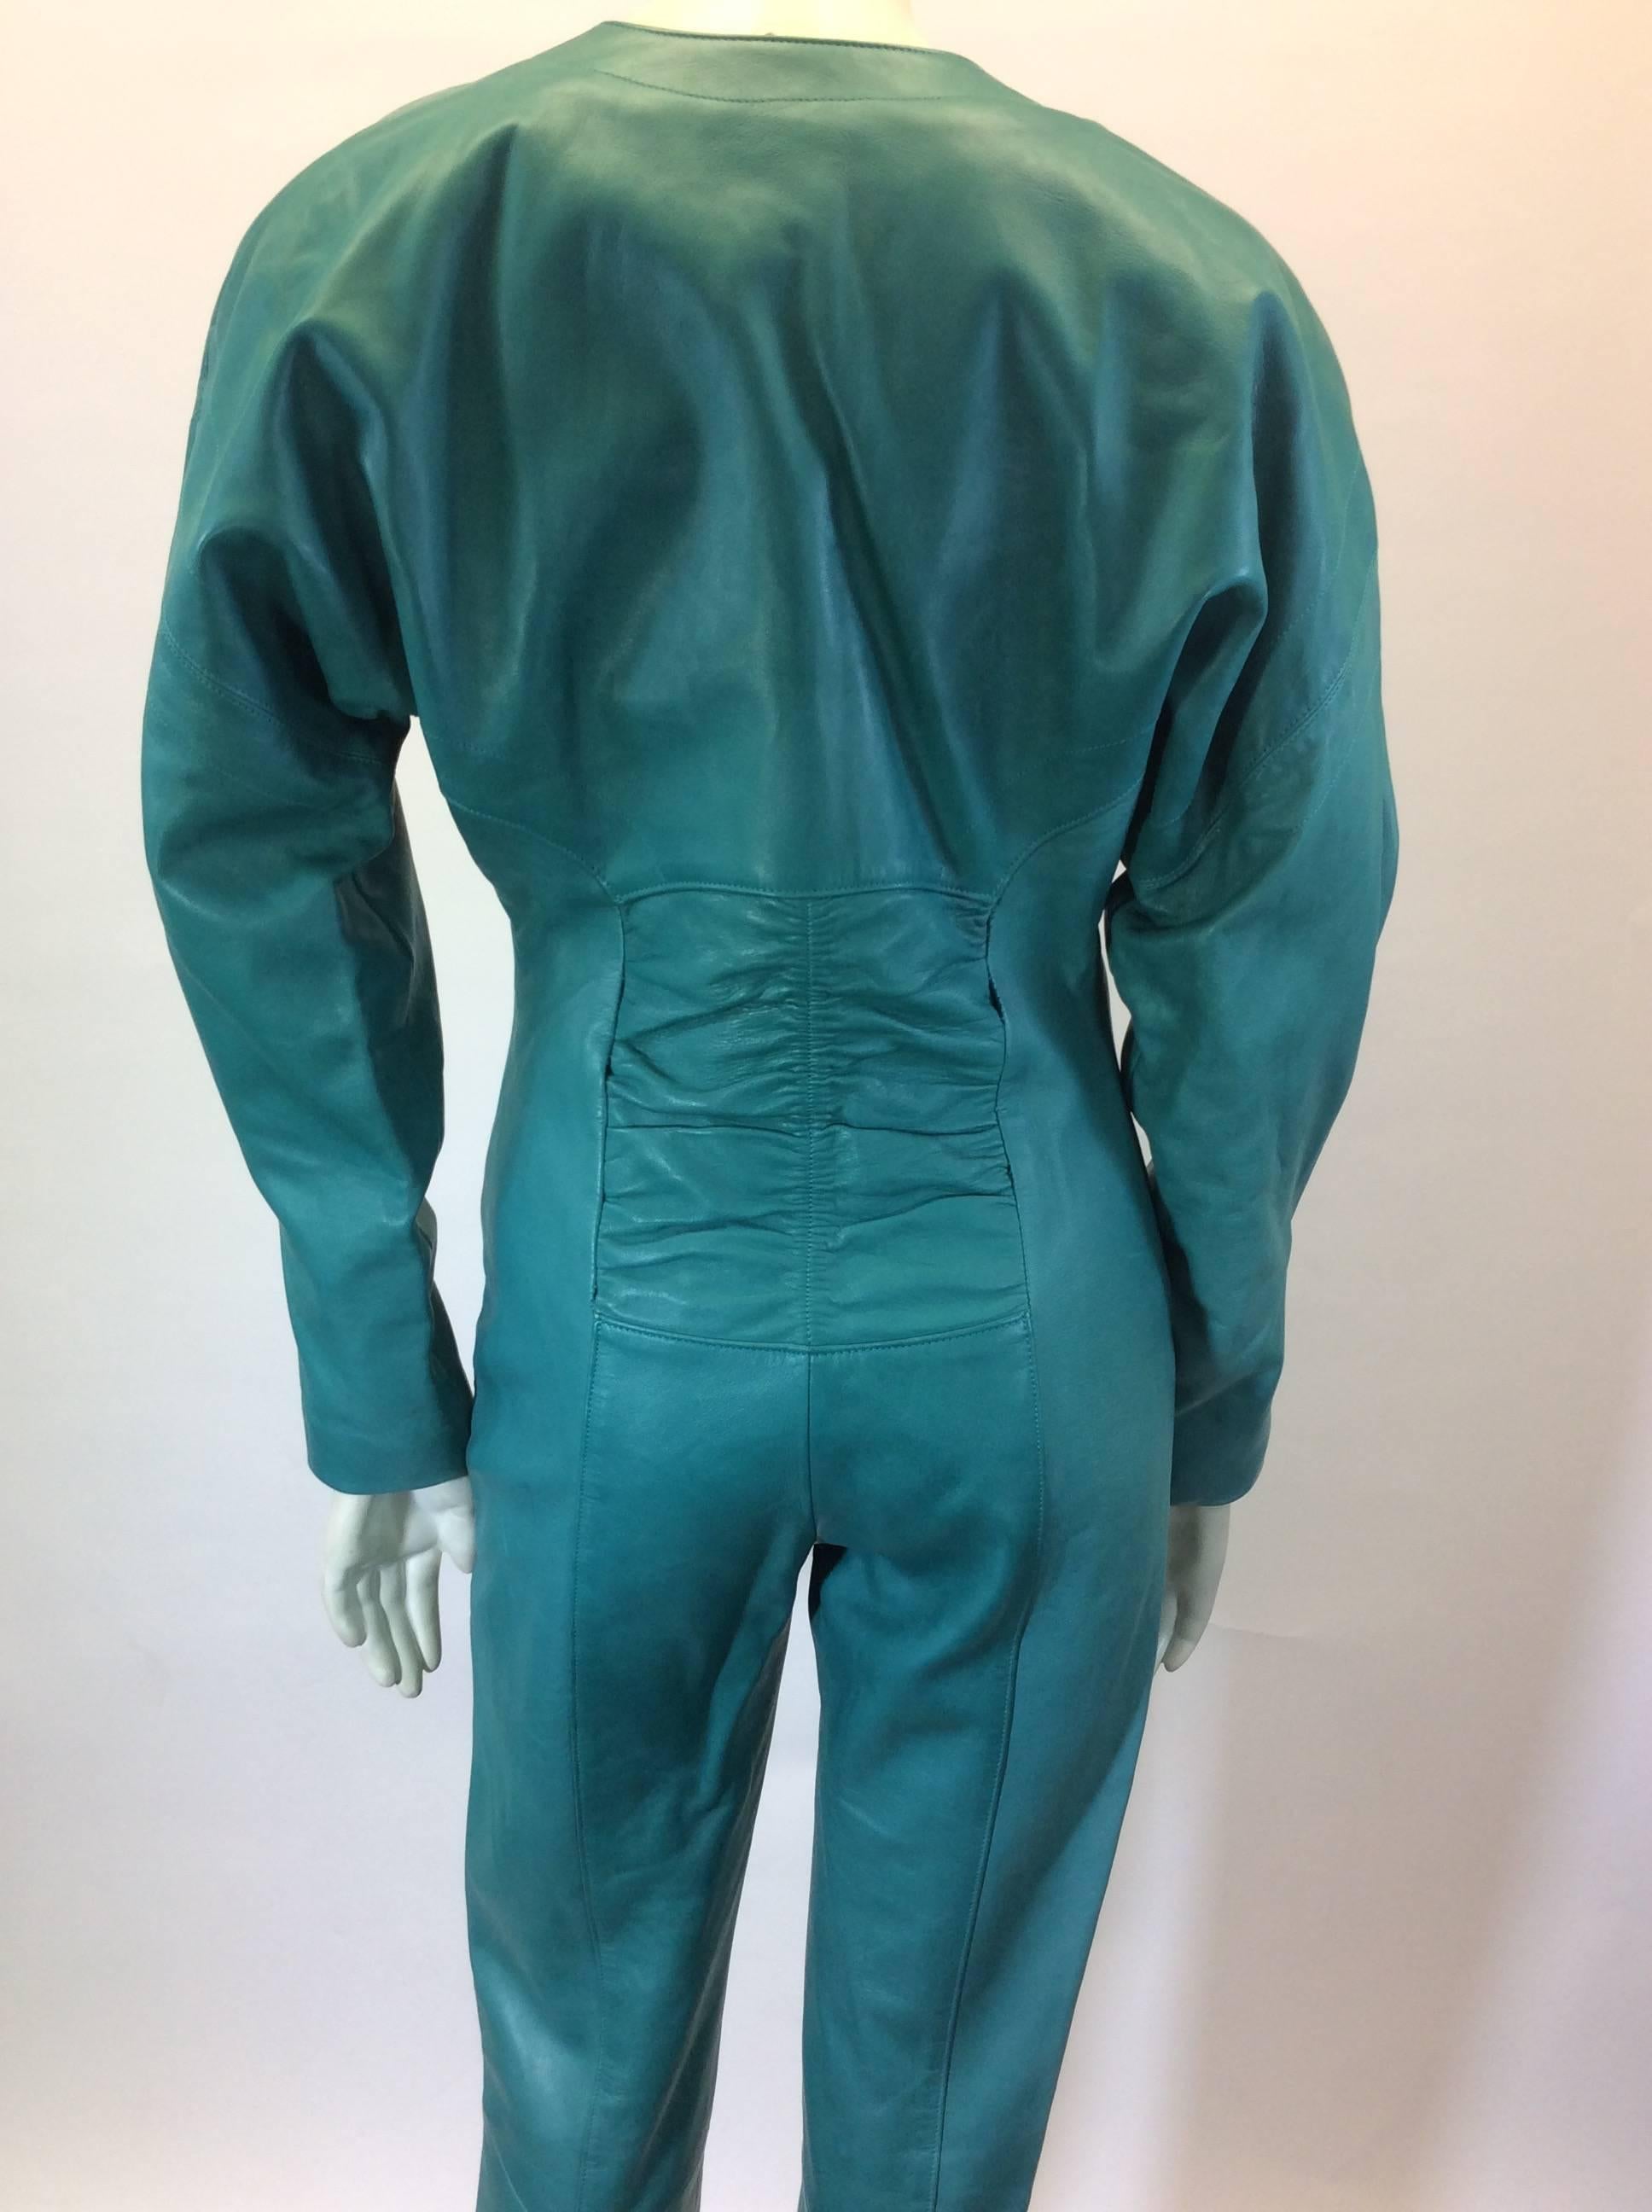 Jean Claude Jitrois Teal Vintage Leather Full Body Jumpsuit In Excellent Condition For Sale In Narberth, PA